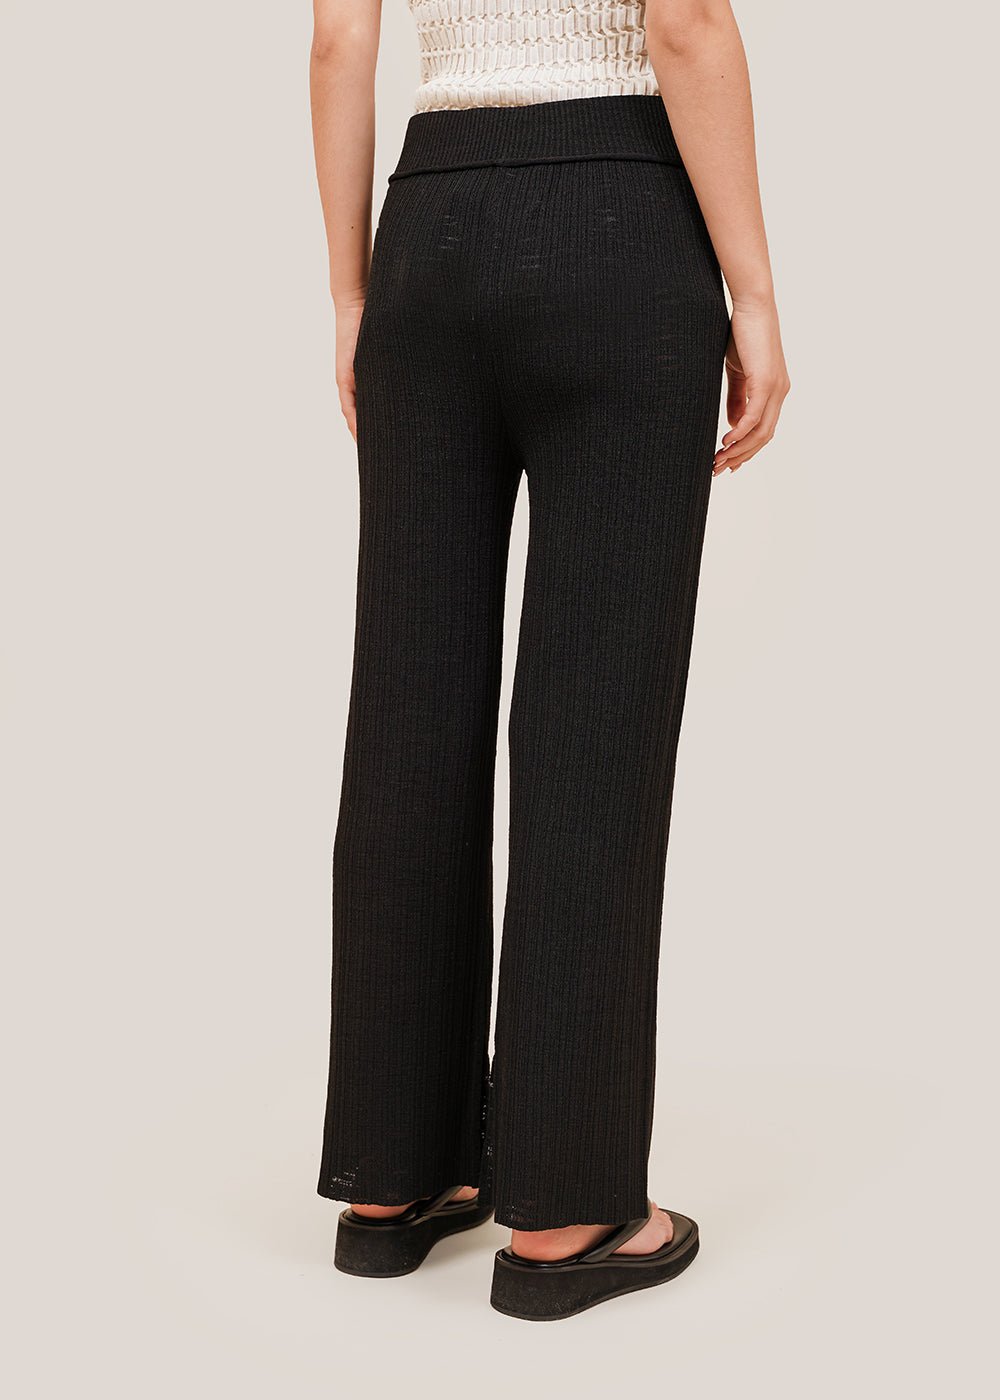 Shop Textured Palazzo Pants in Regular Fit with Side Tape Detail Online